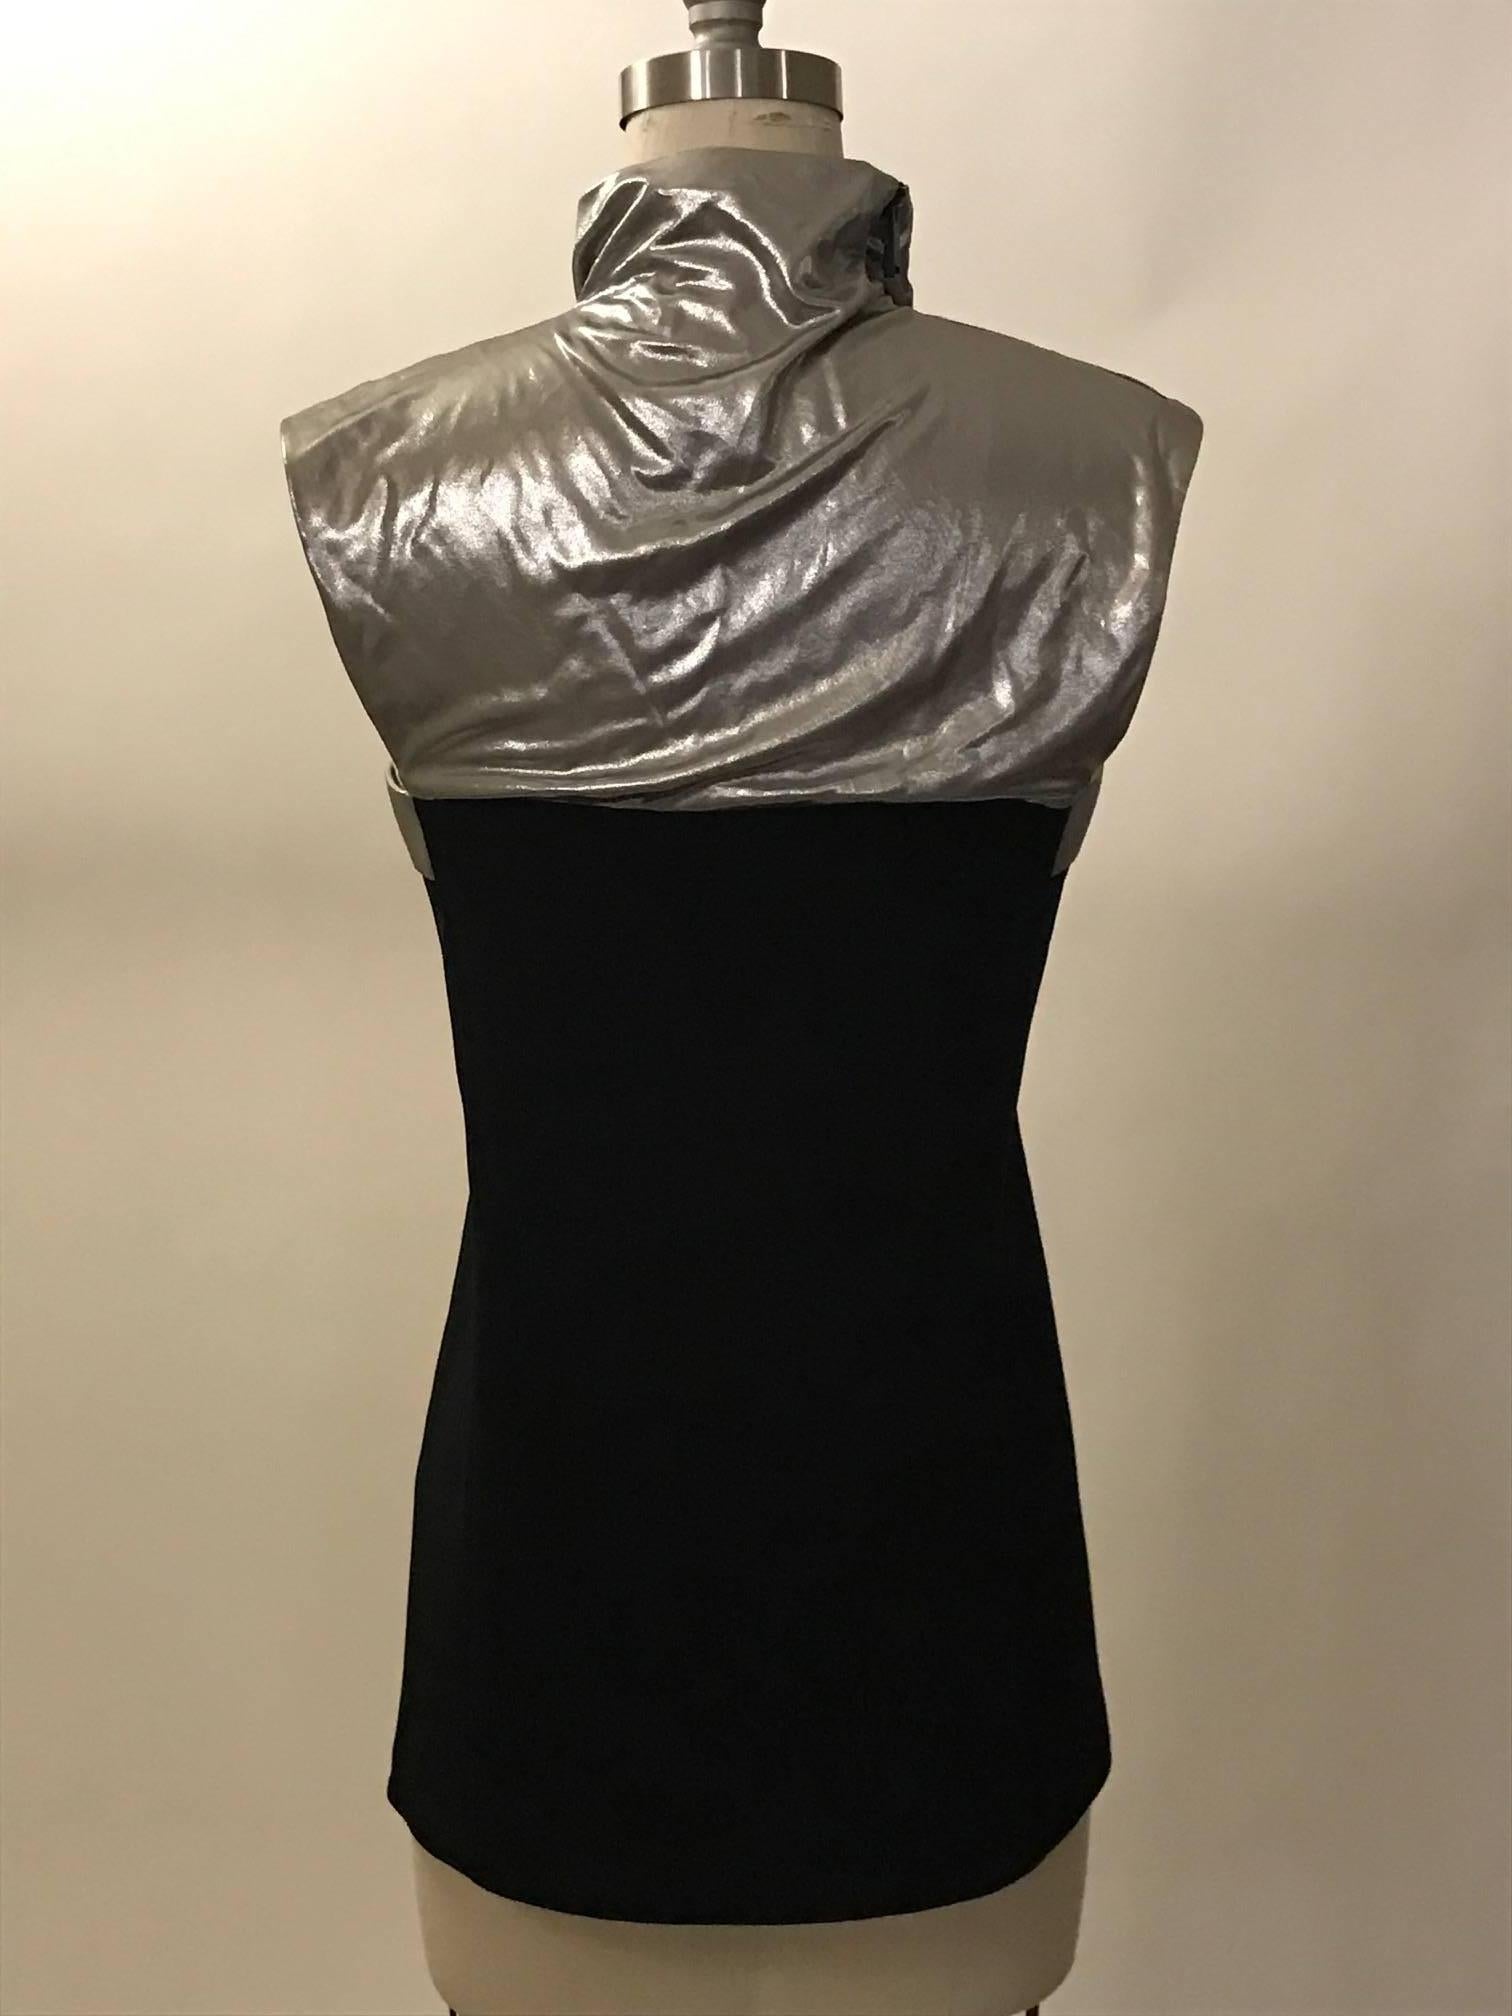 Paco Rabanne recent collection black sleeveless fitted top with draped silver metallic detail at chest. Black zip at one side of shoulder/neck. 

Fabric 1: 80% triacetate, 20% polyester.
Fabric 2: 100% viscose.
100% silk lining at top.

Made in